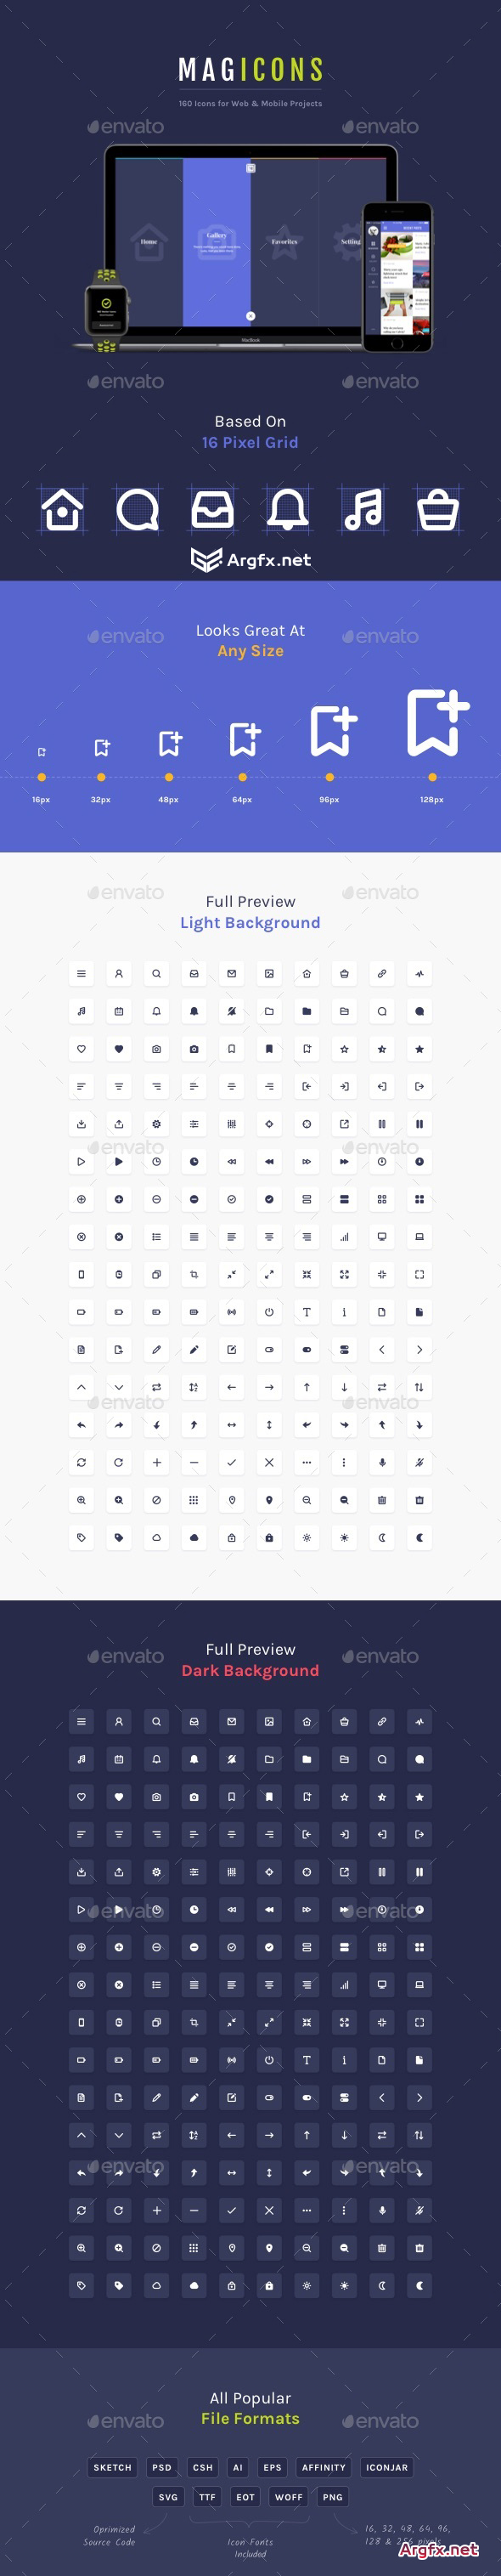 GraphicRiver - Magicons 160 Icons for Web and Mobile 19211647